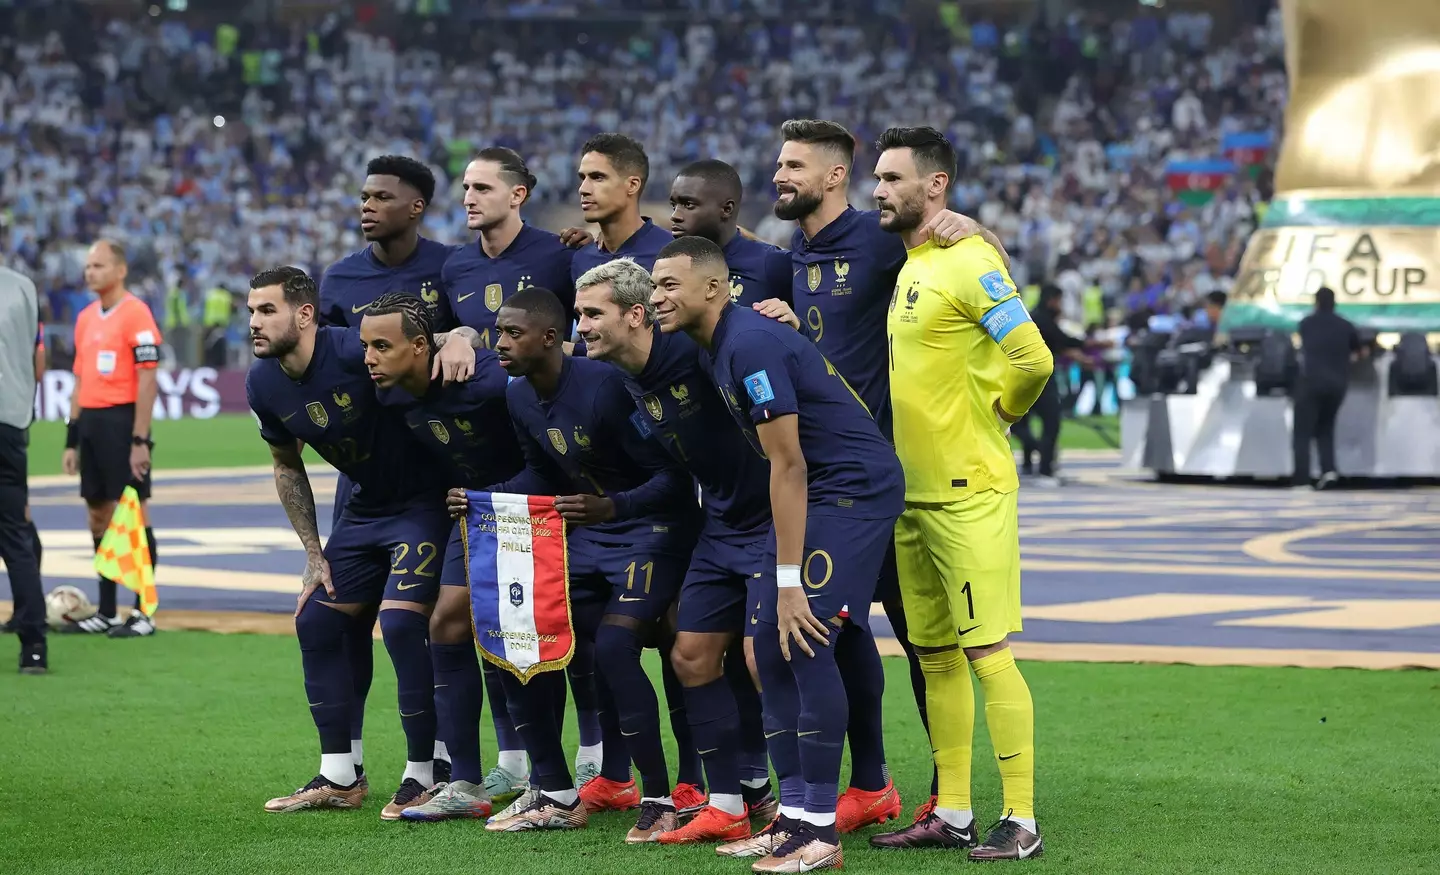 France went into the match as World Cup holders.